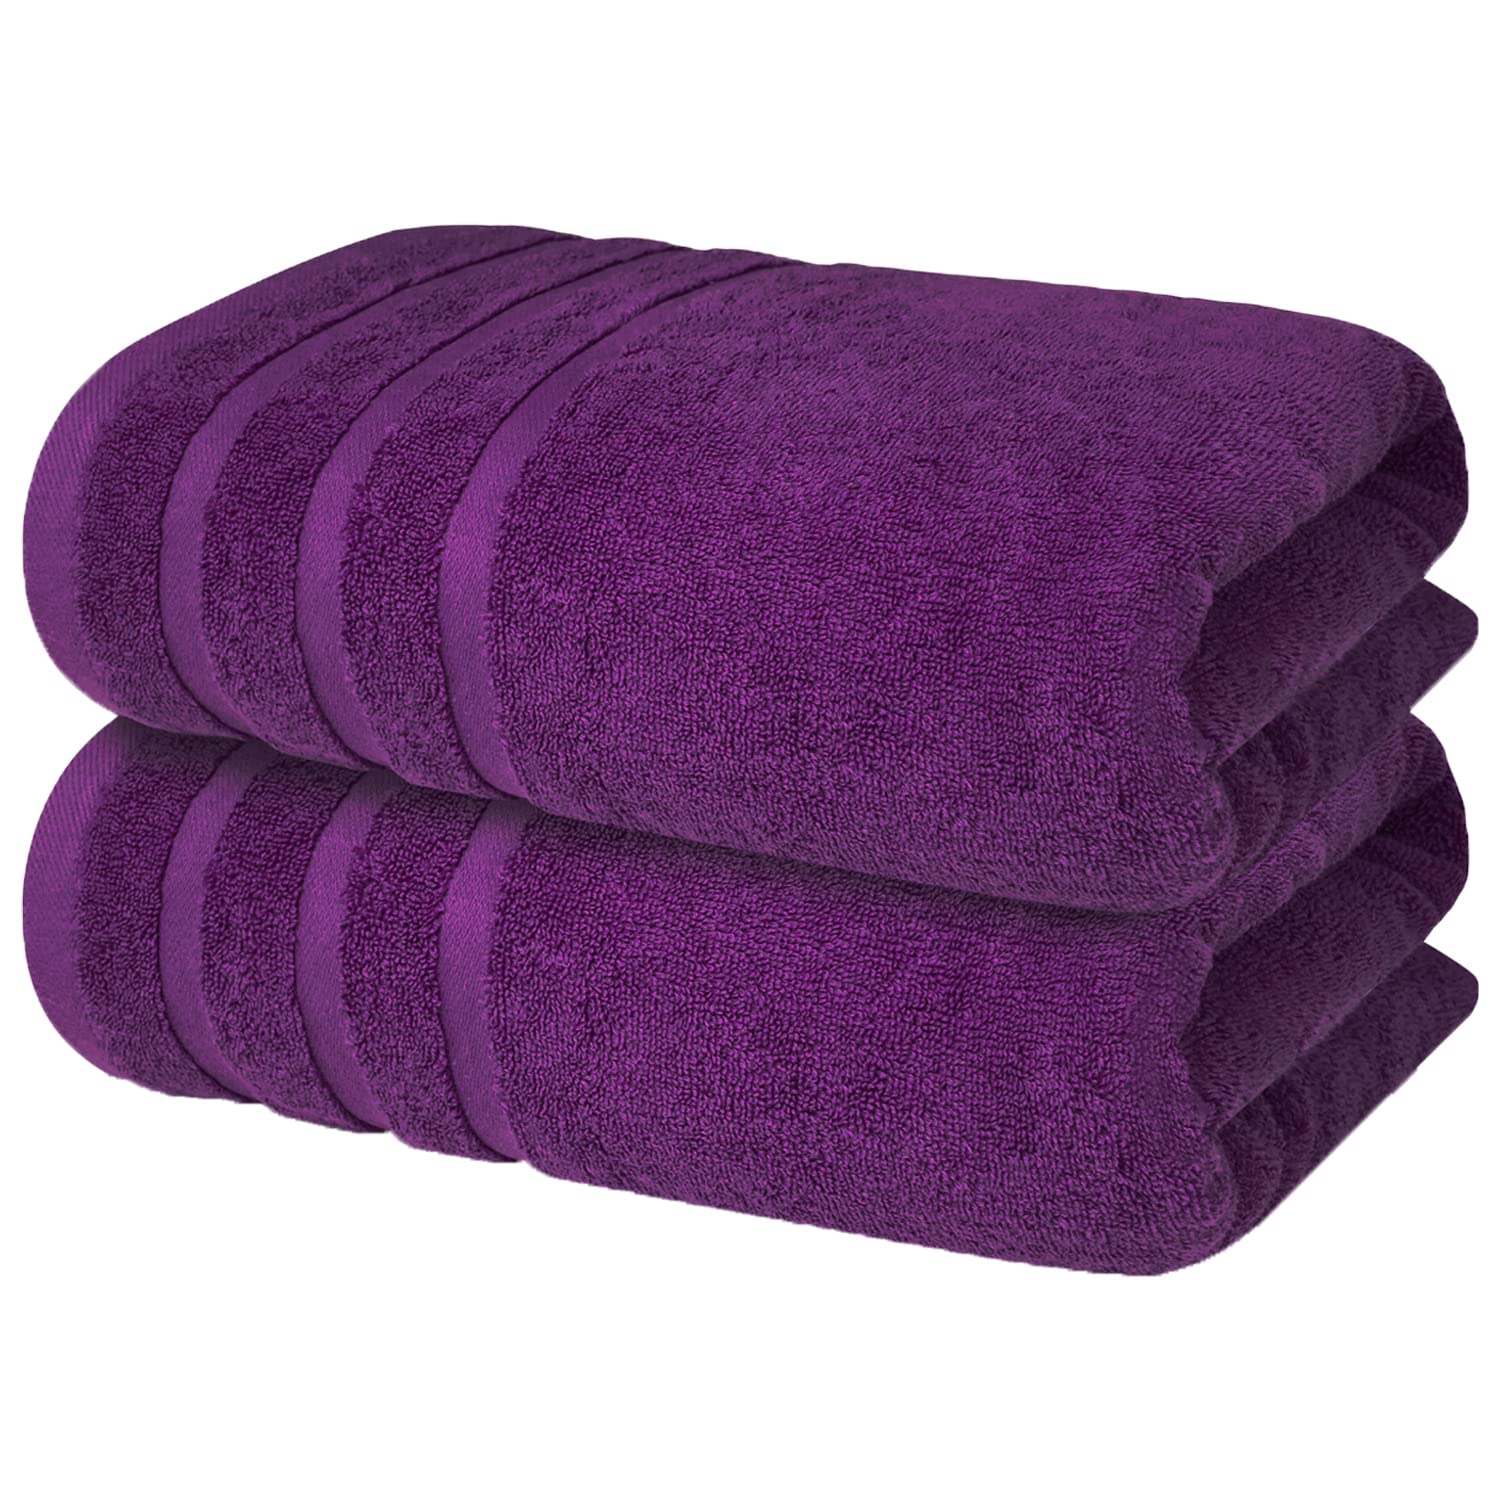 Infinitee Xclusives Premium Purple Bath Towels - 700 GSM 100% Cotton 27x54 Inches Pack of 2 Bathroom Towels - Ultra Soft and Highly Absorbent Hotel 